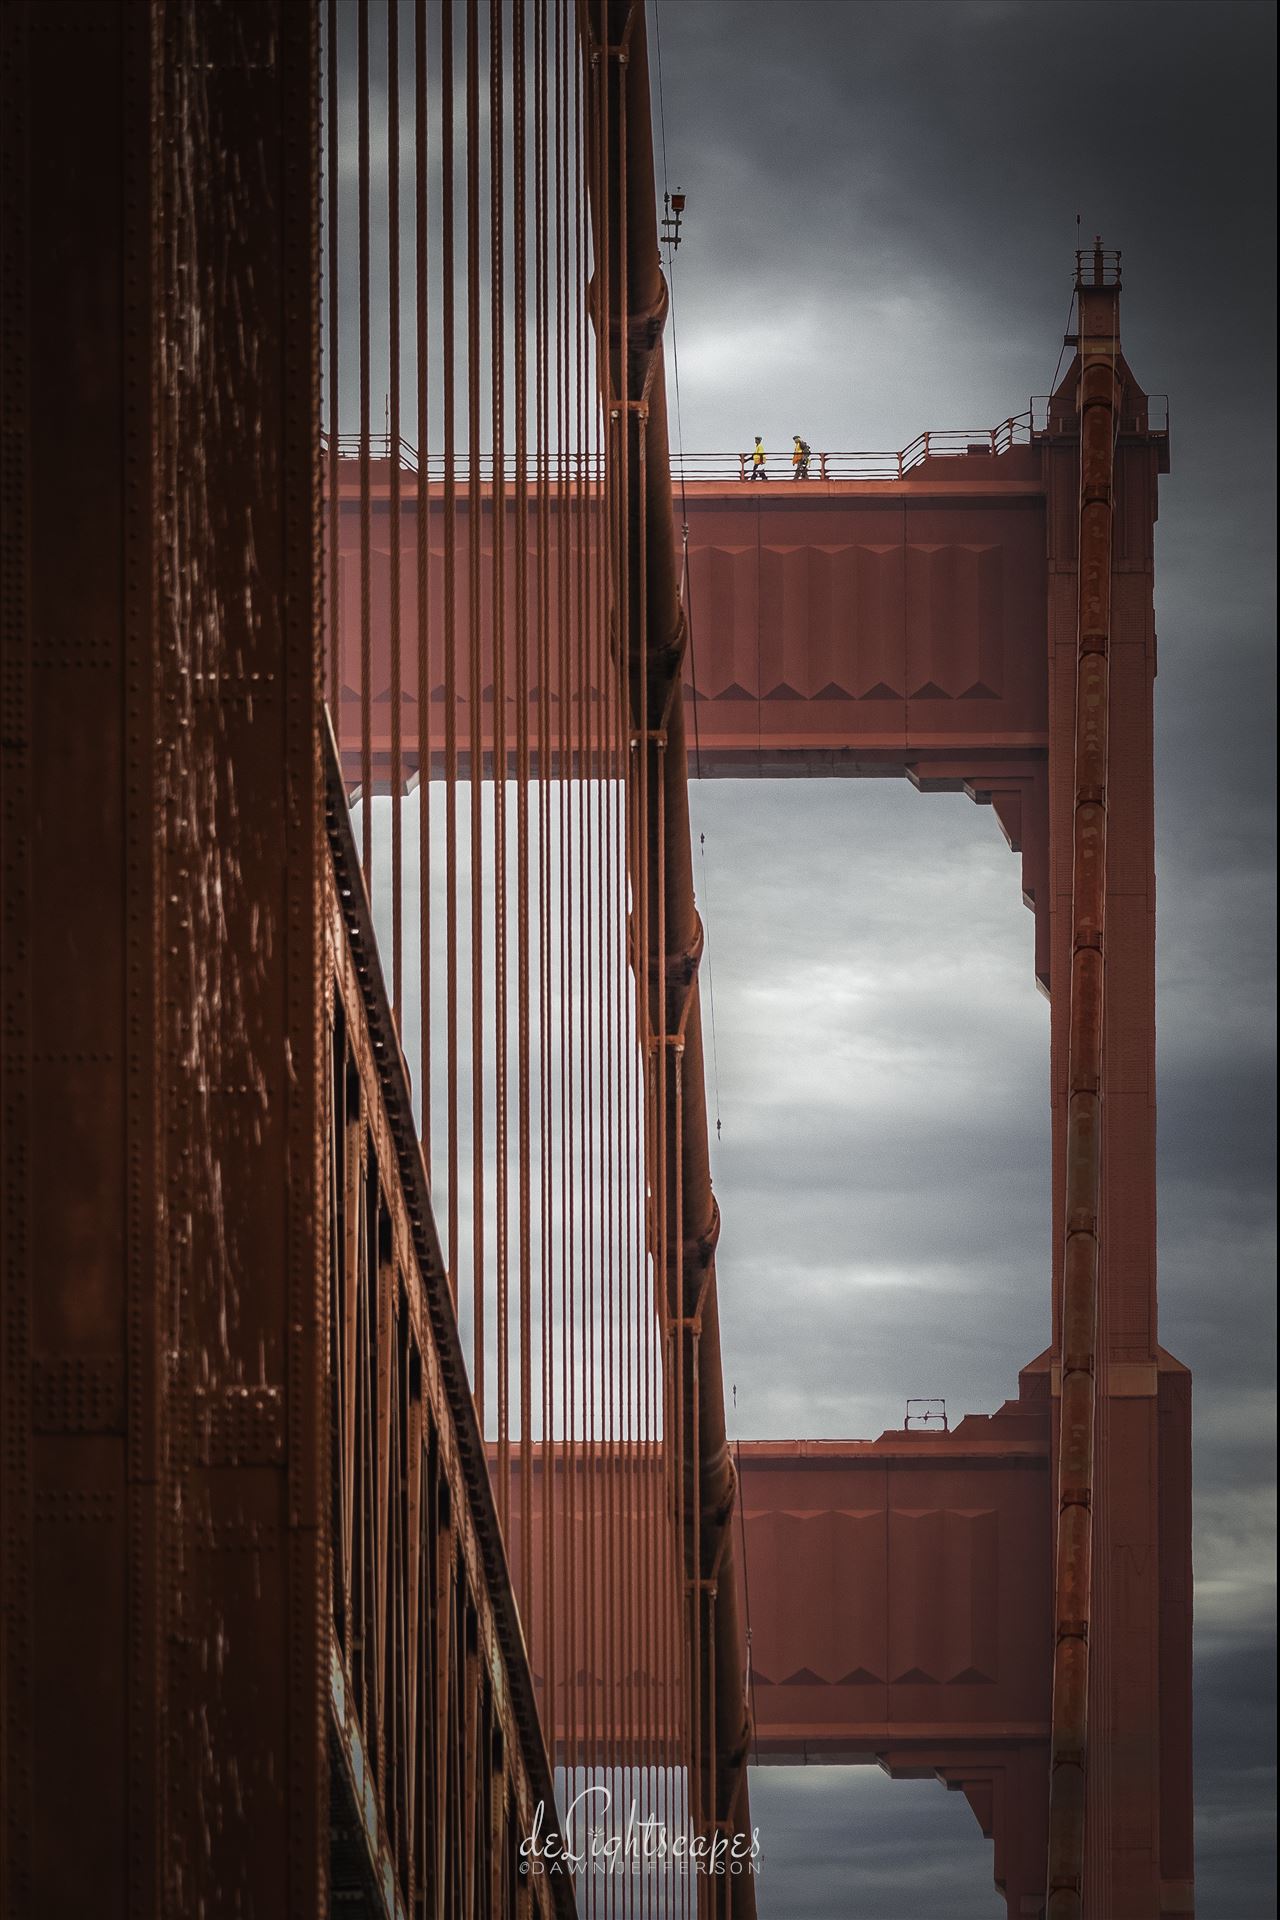 Hard Day's Work - Two workers on top of the Golden Gate Bridge by Dawn Jefferson